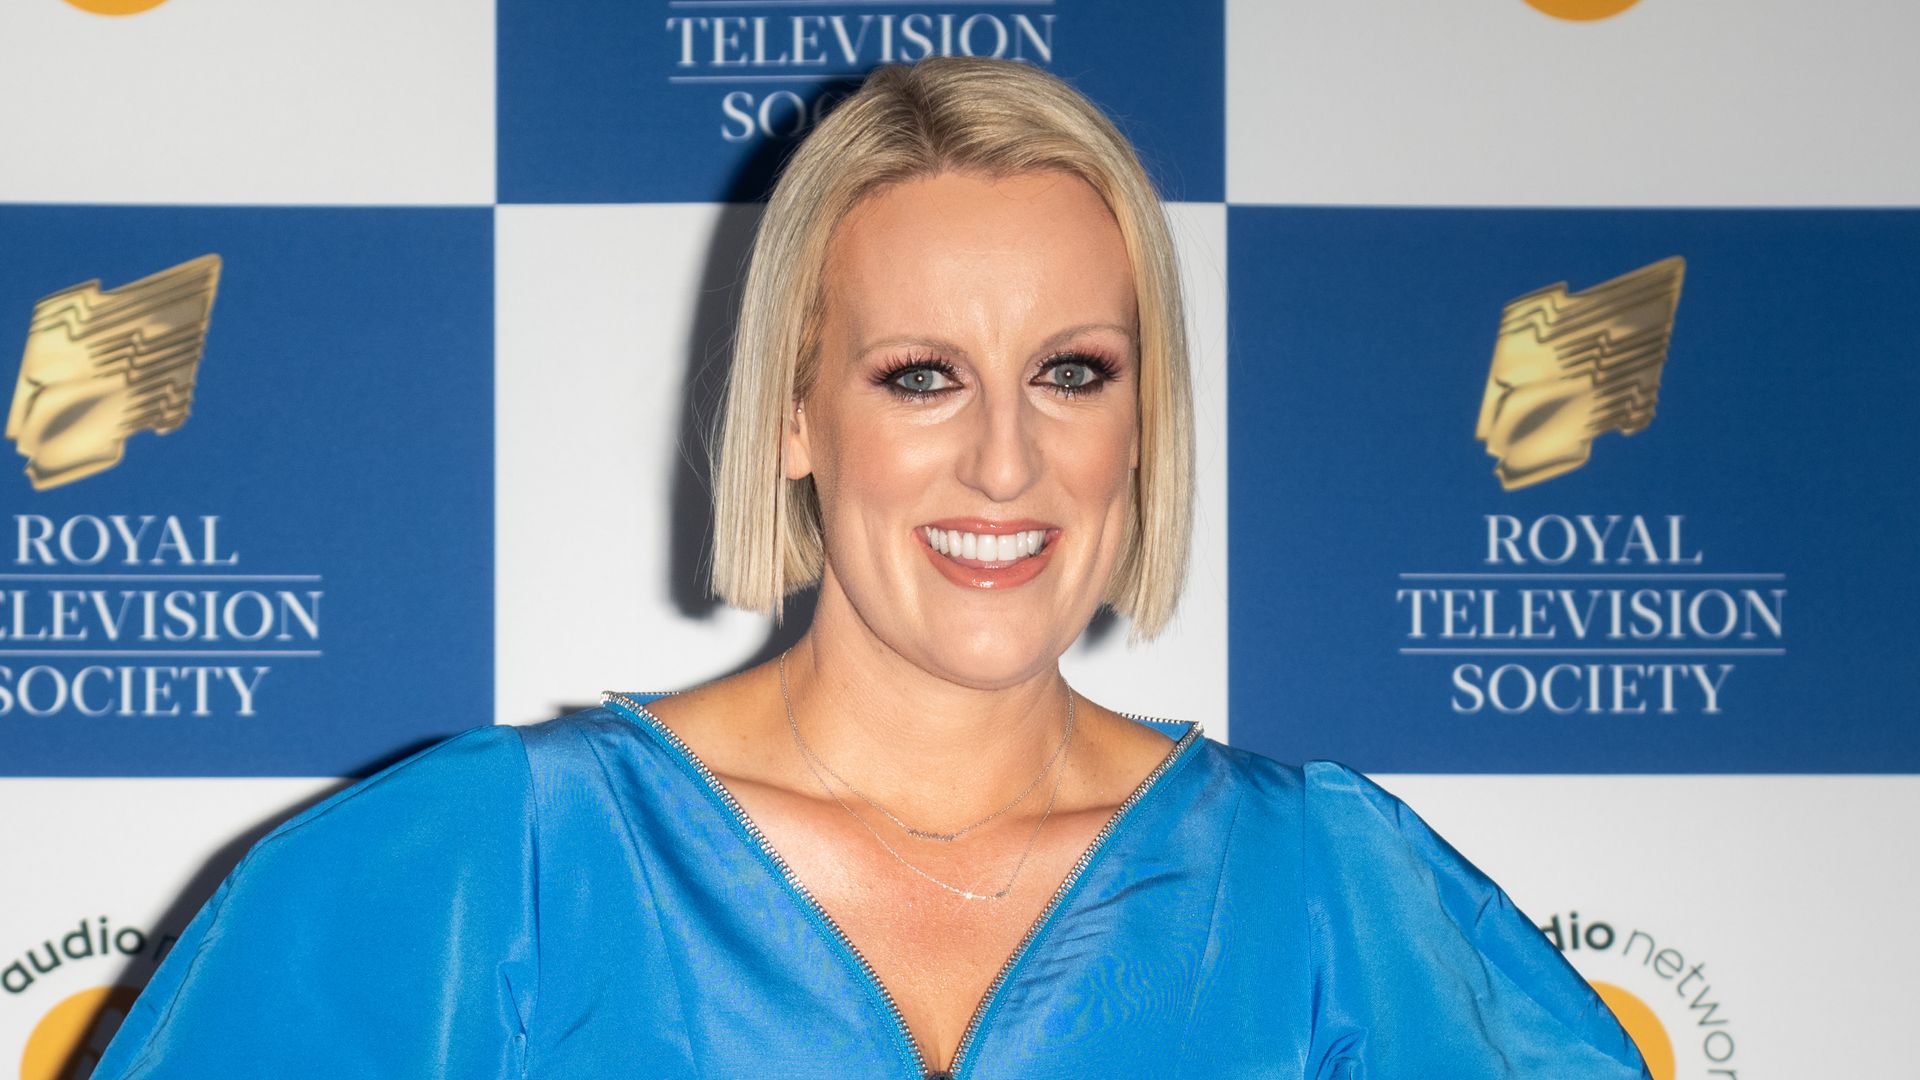 Steph McGovern attends the Royal Television Society Programme Awards at The Grosvenor House Hotel on March 29, 2022 in London, England.